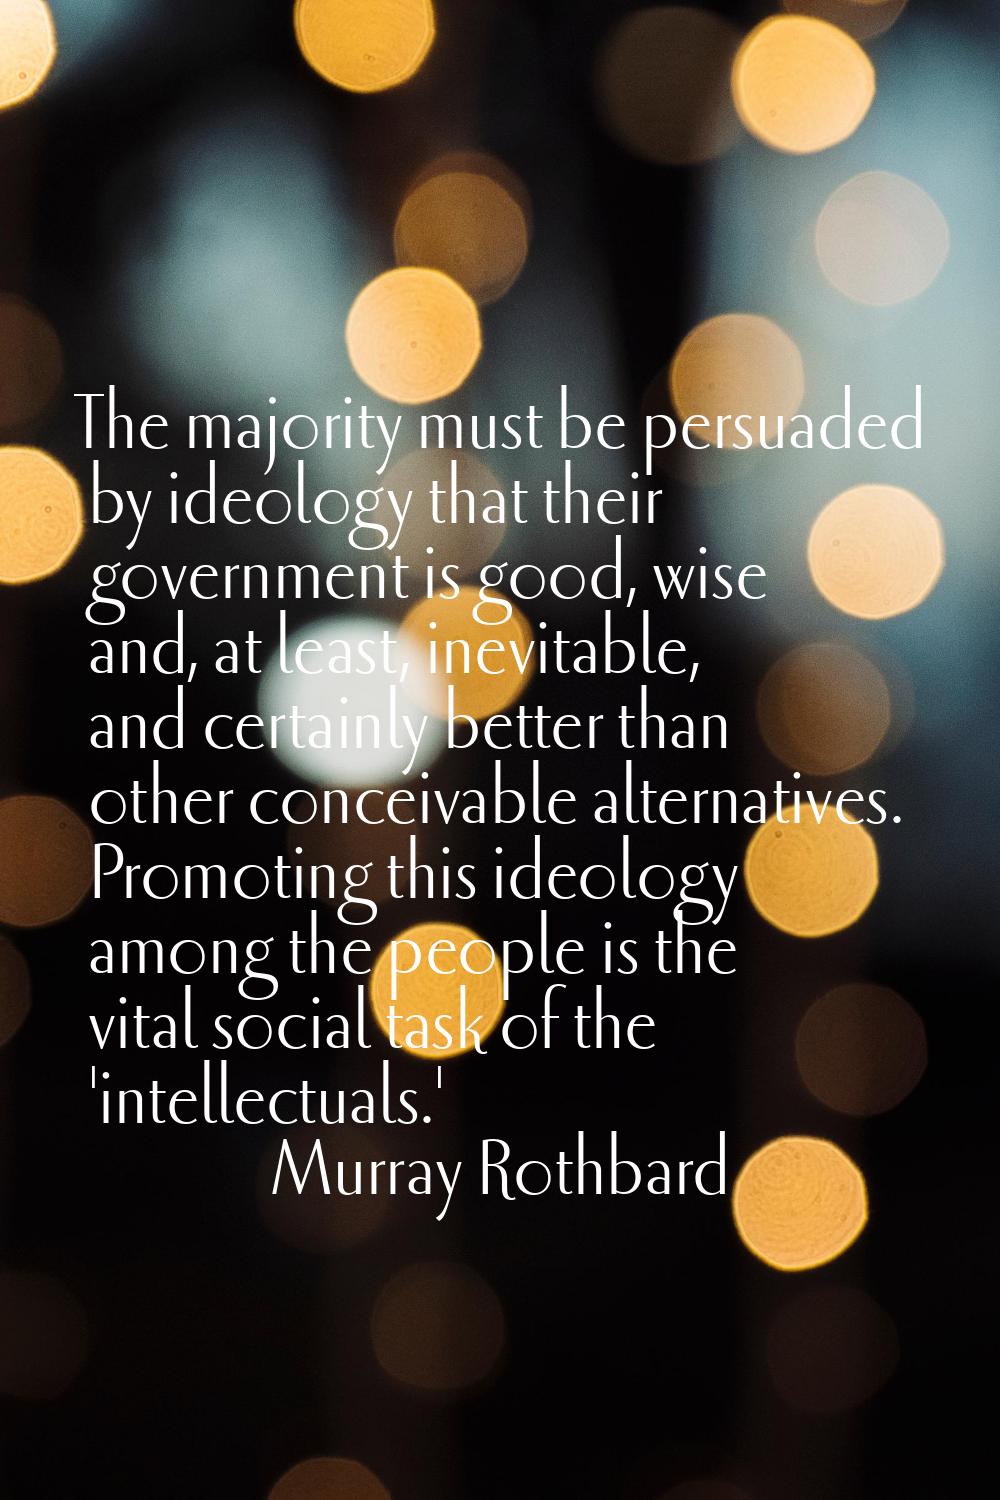 The majority must be persuaded by ideology that their government is good, wise and, at least, inevi